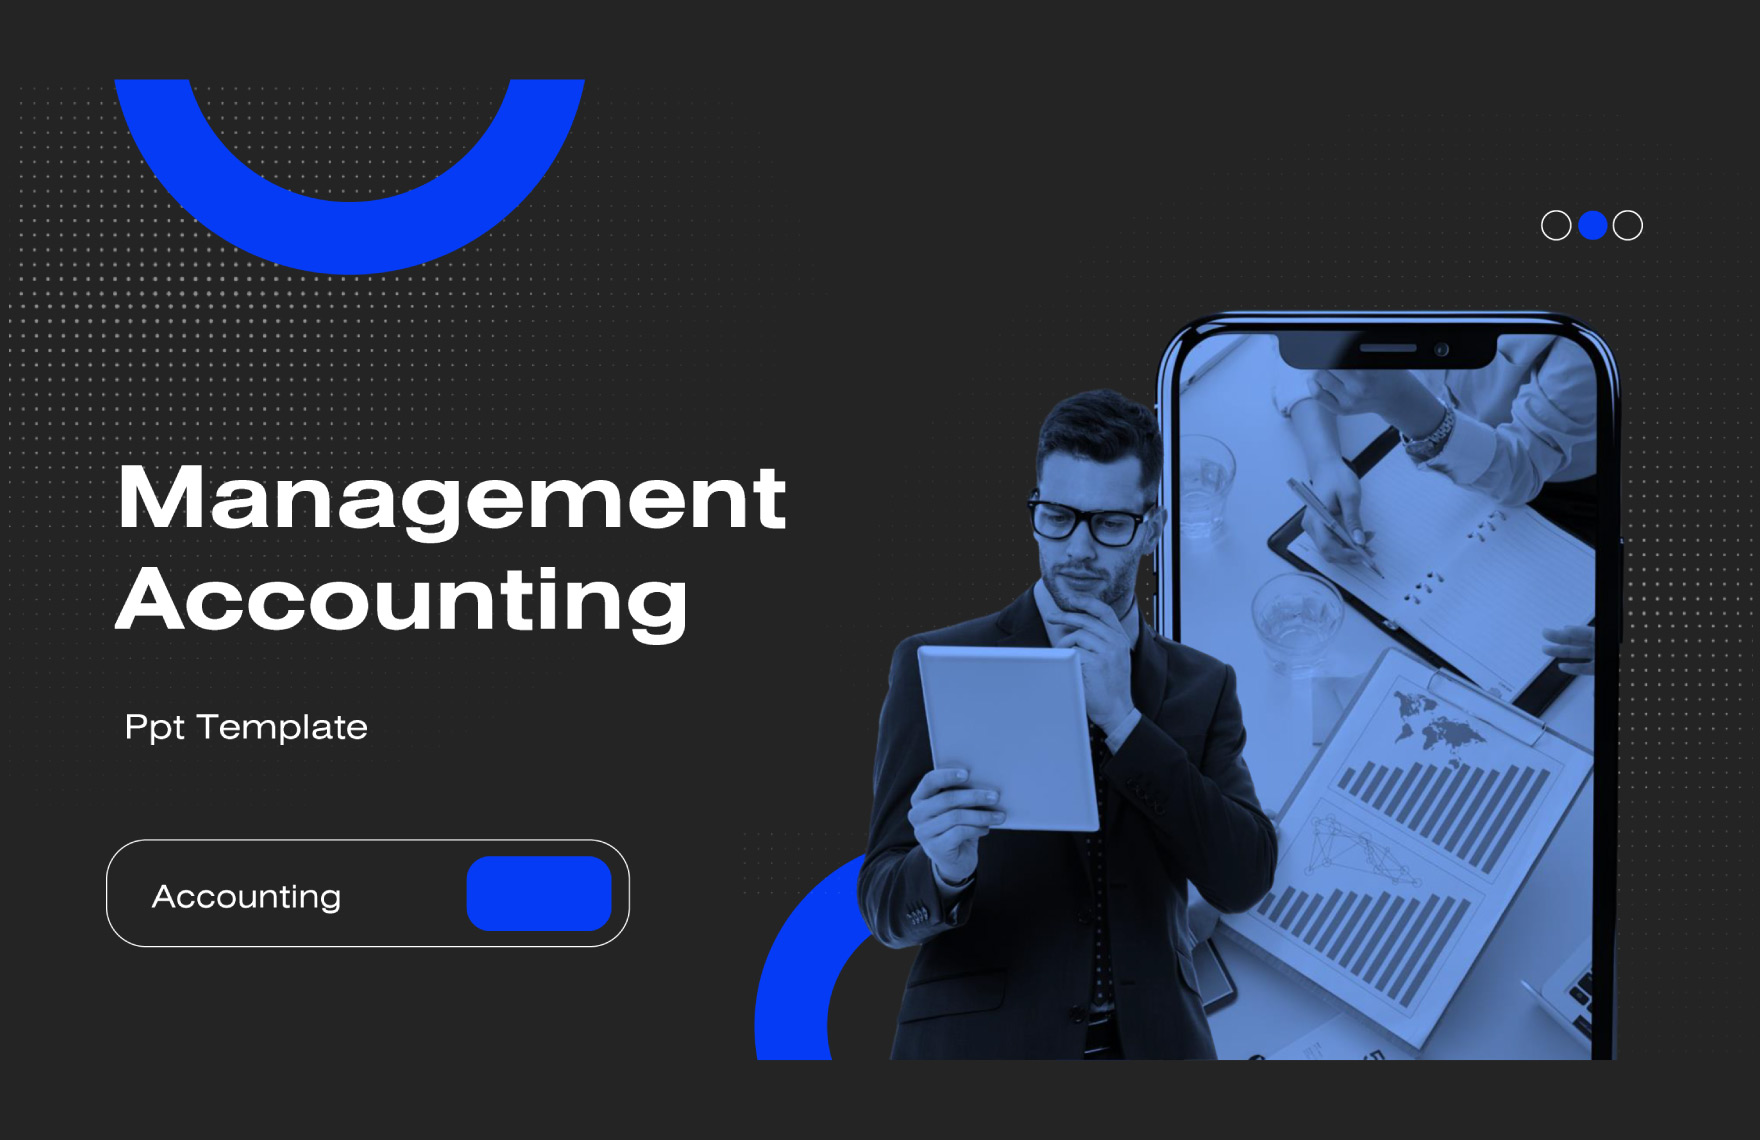 Management Accounting PPT Template